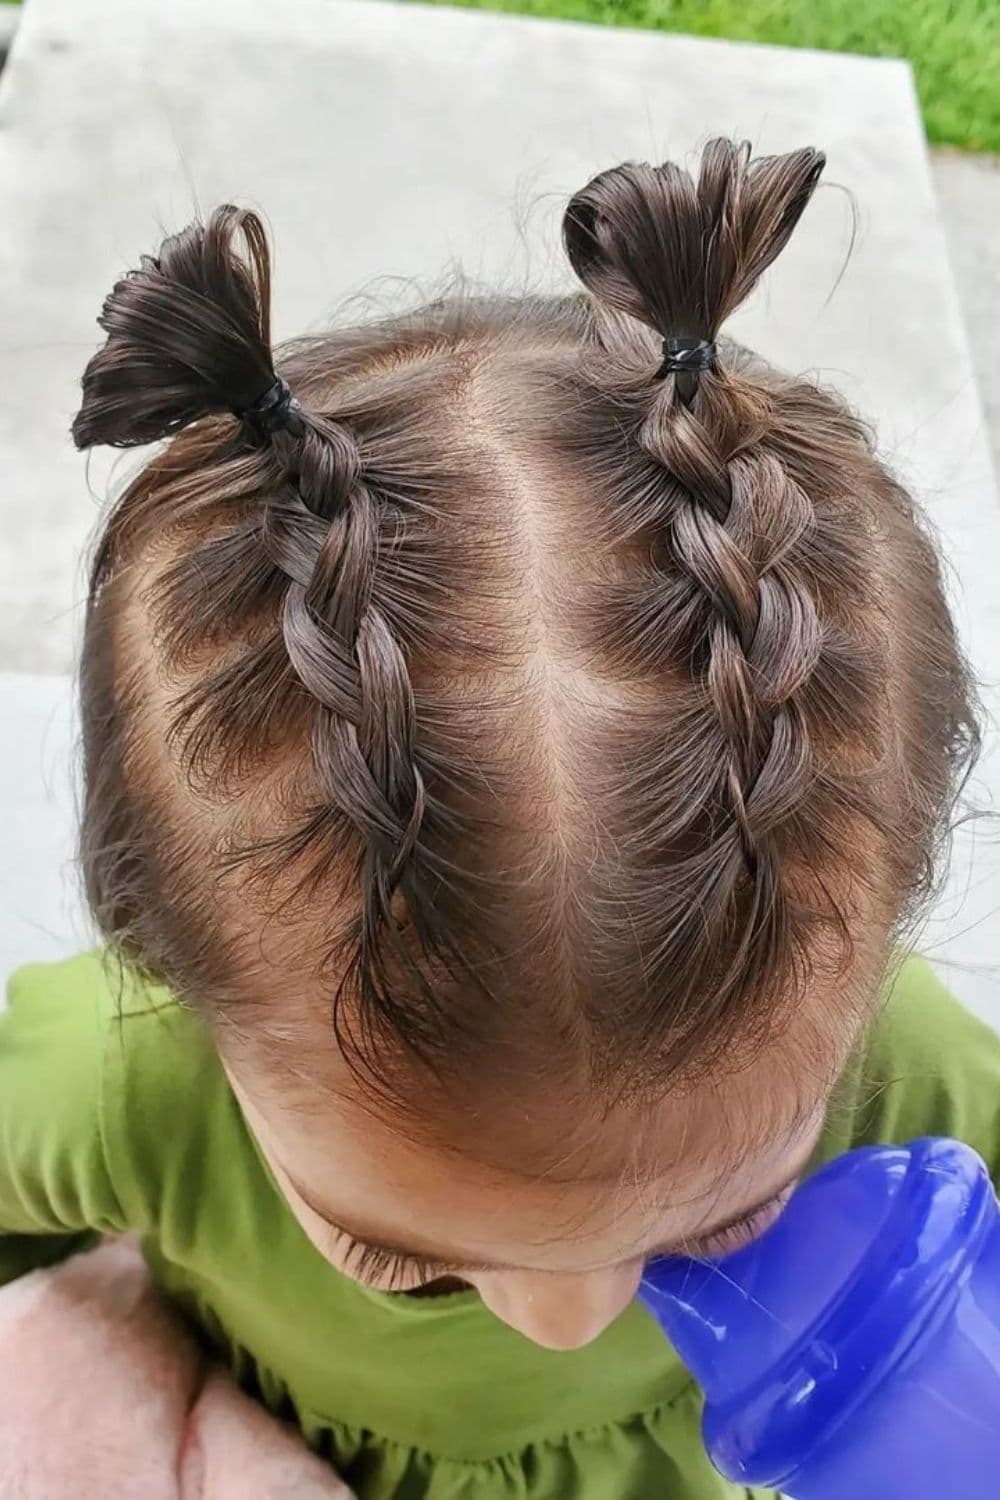 A little girl with double Dutch braids into high buns.